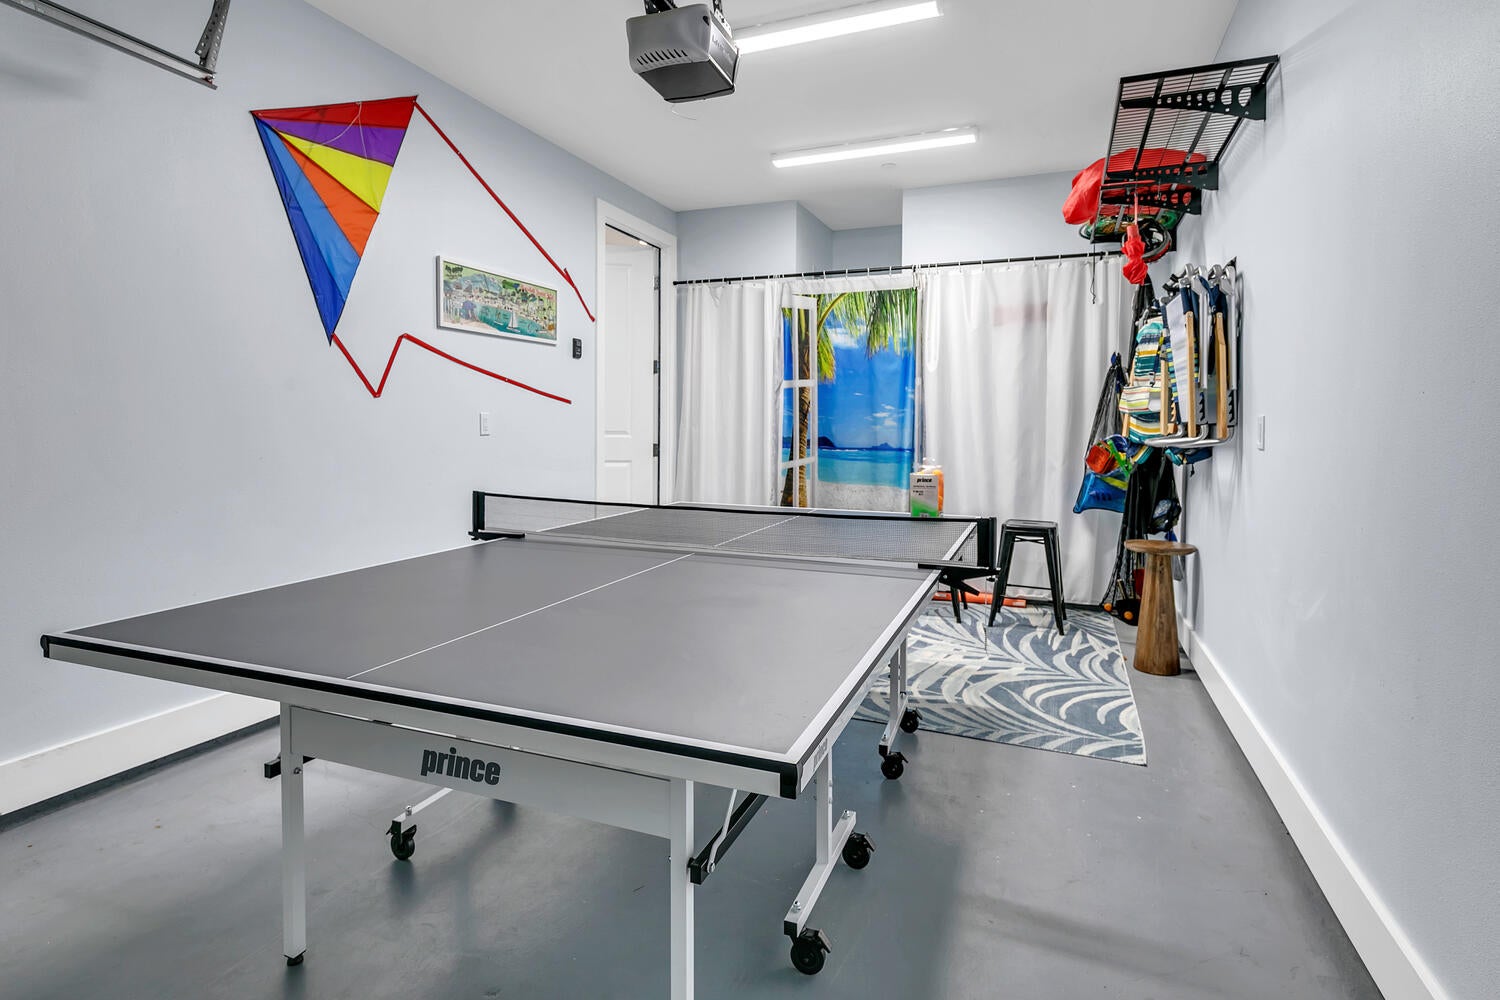 Ping pong in the garage